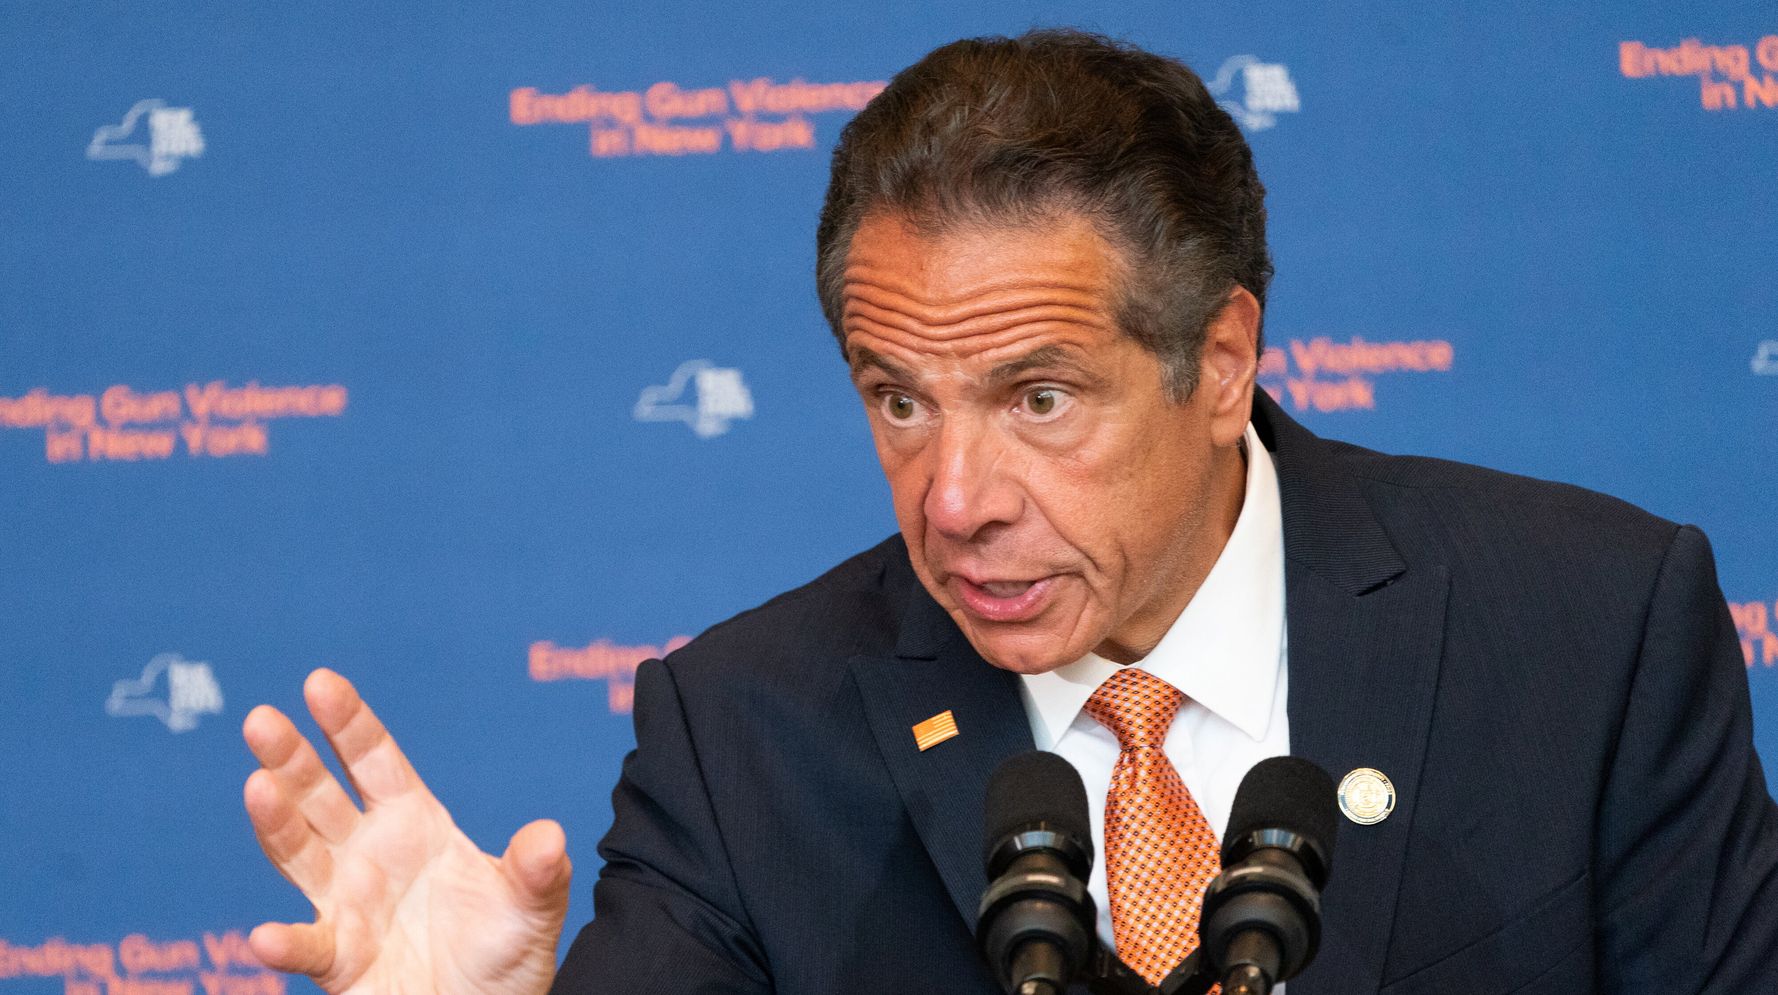 Andrew Cuomo Denies Sexual Harassment Accusations In Bizarre Press Conference